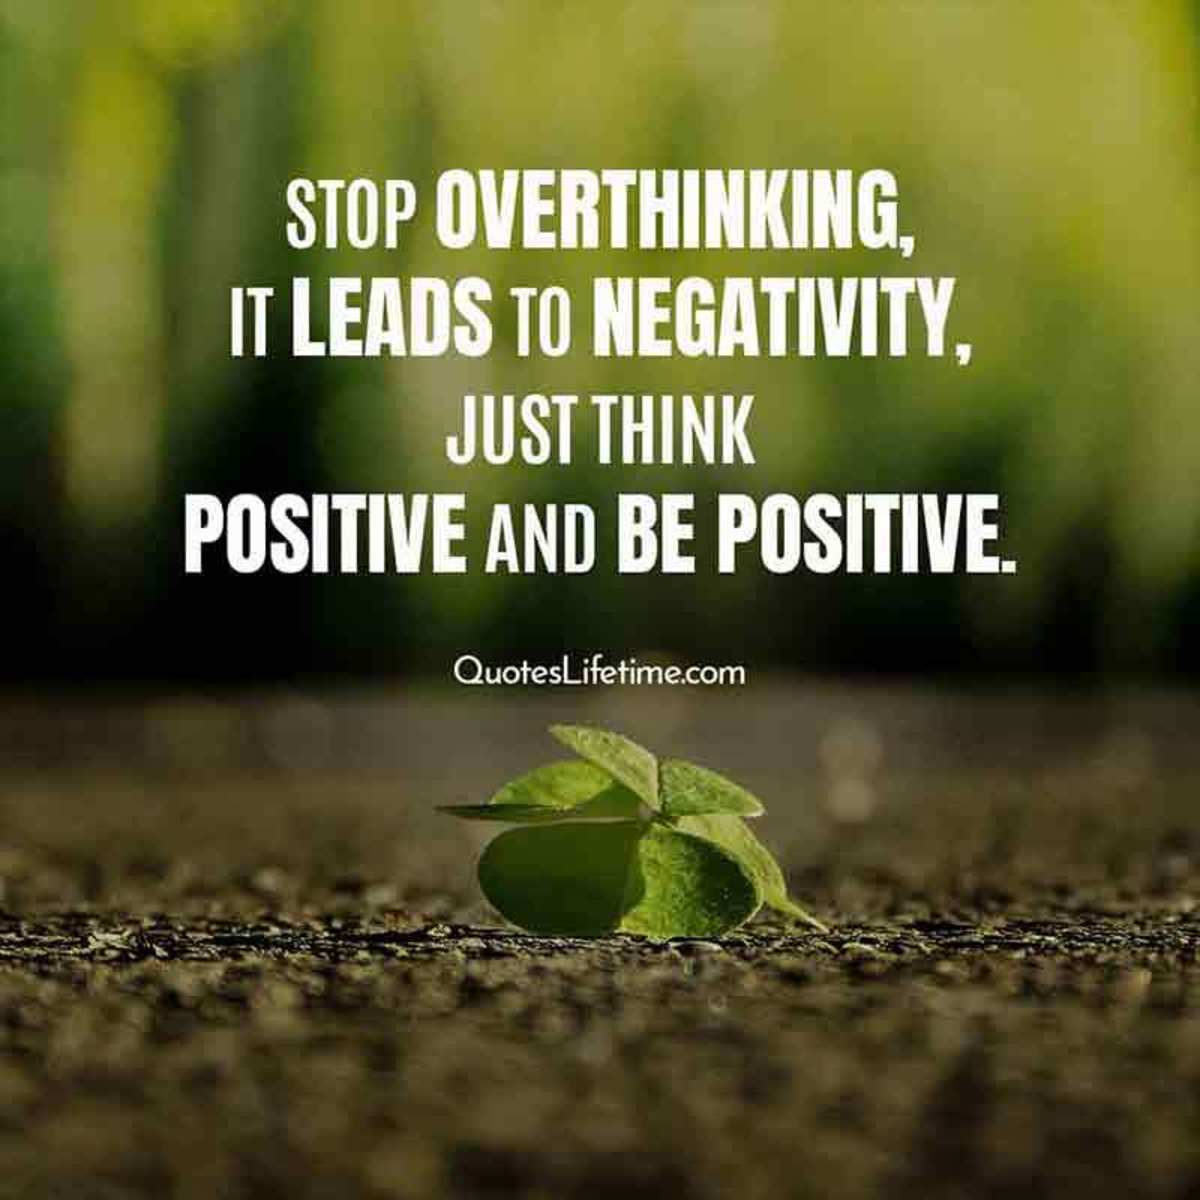 positive-thinking-can-change-whole-the-world